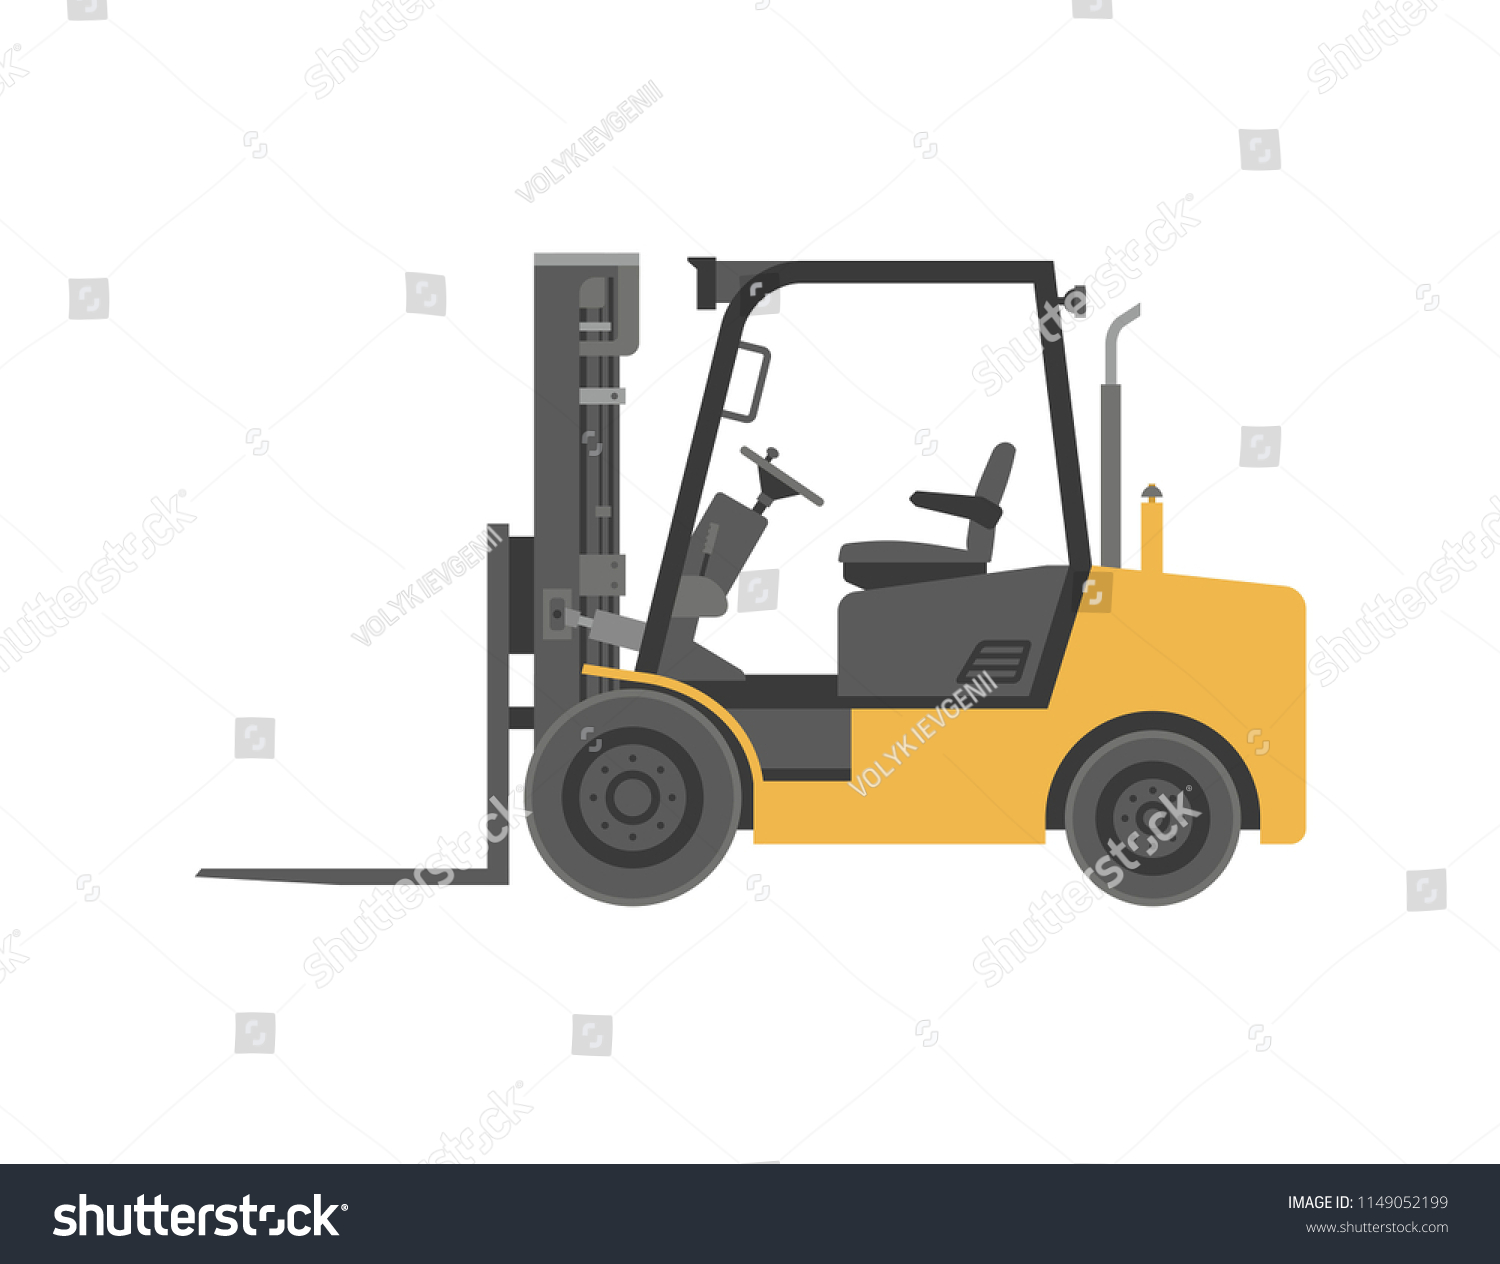 Forklift truck. flat style. isolated on white background #1149052199